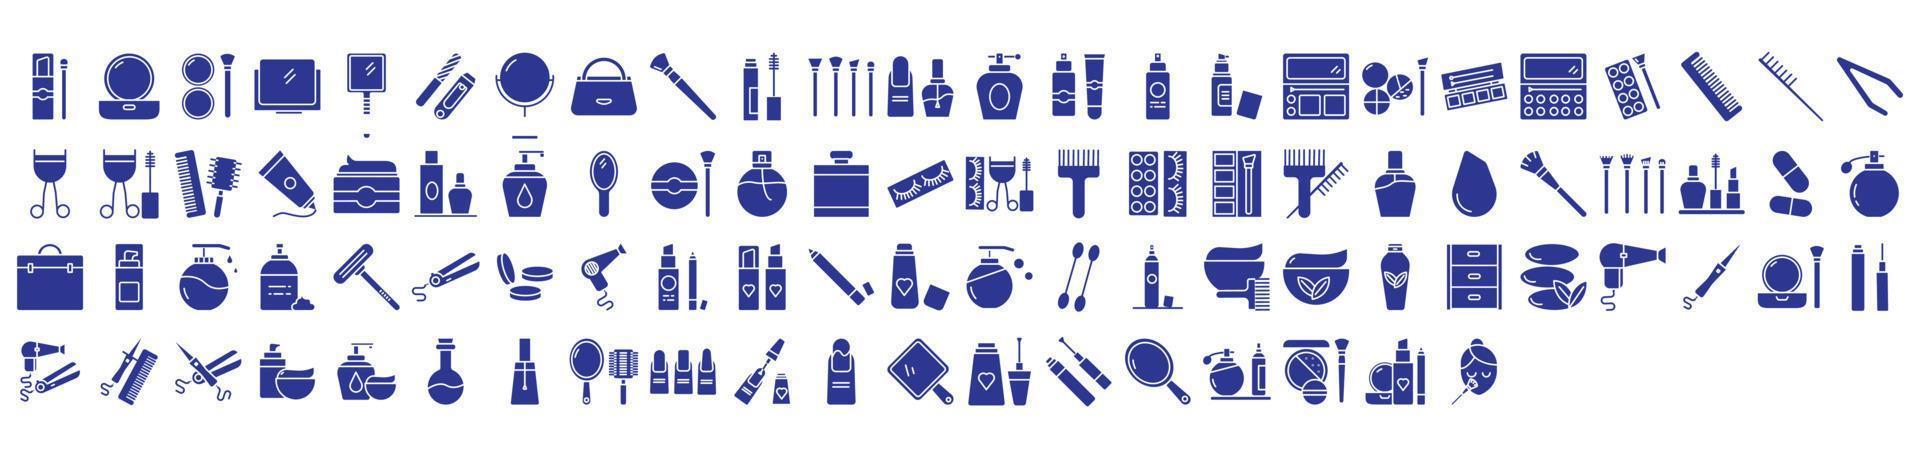 Collection of icons related to Cosmetics and makeup, including icons like Lipstick, Brush, Makeup Bag and more. vector illustrations, Pixel Perfect